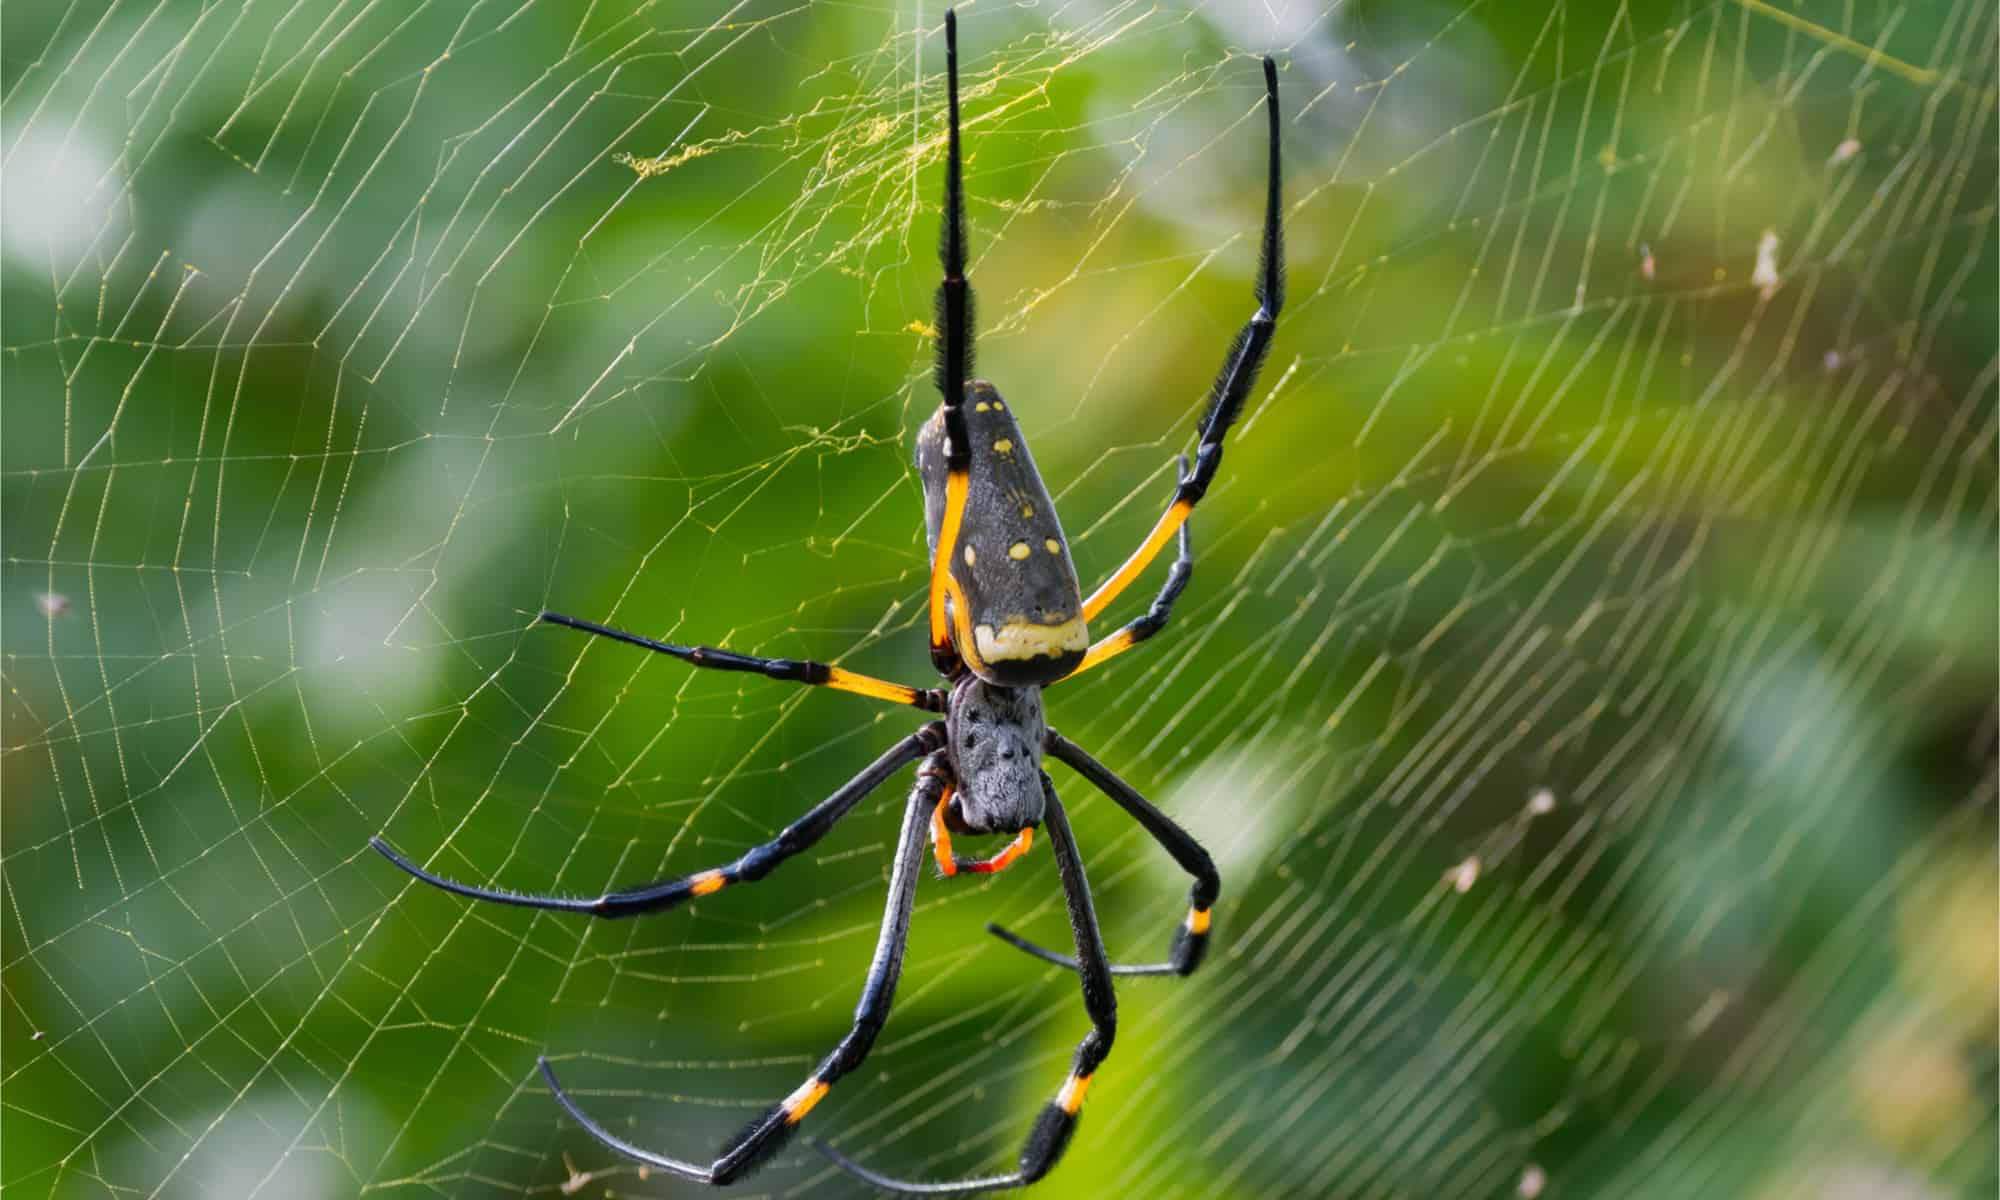 <p>The golden silk orbweaver is a delicate spider found in North and South America. The females have a 6-inch legspan. </p>